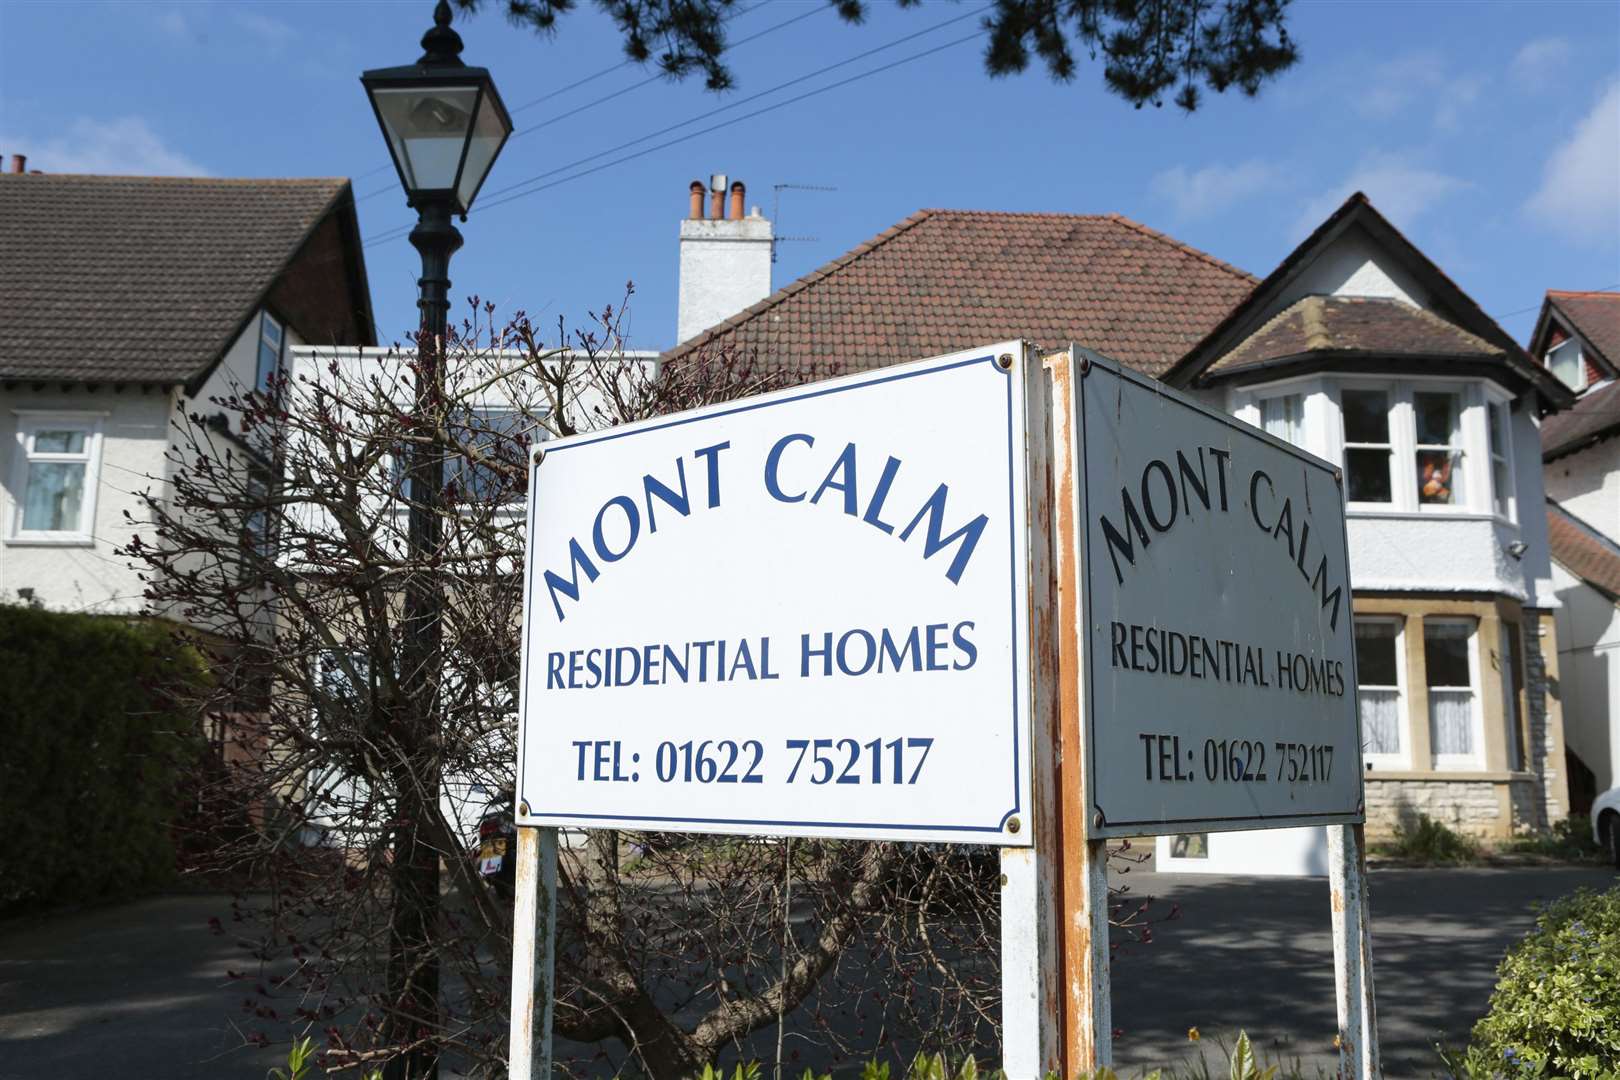 A CQC report has found significant improvements at Mont Calm Residential Care Home, Bower Mount Road, Maidstone. Picture: Martin Apps